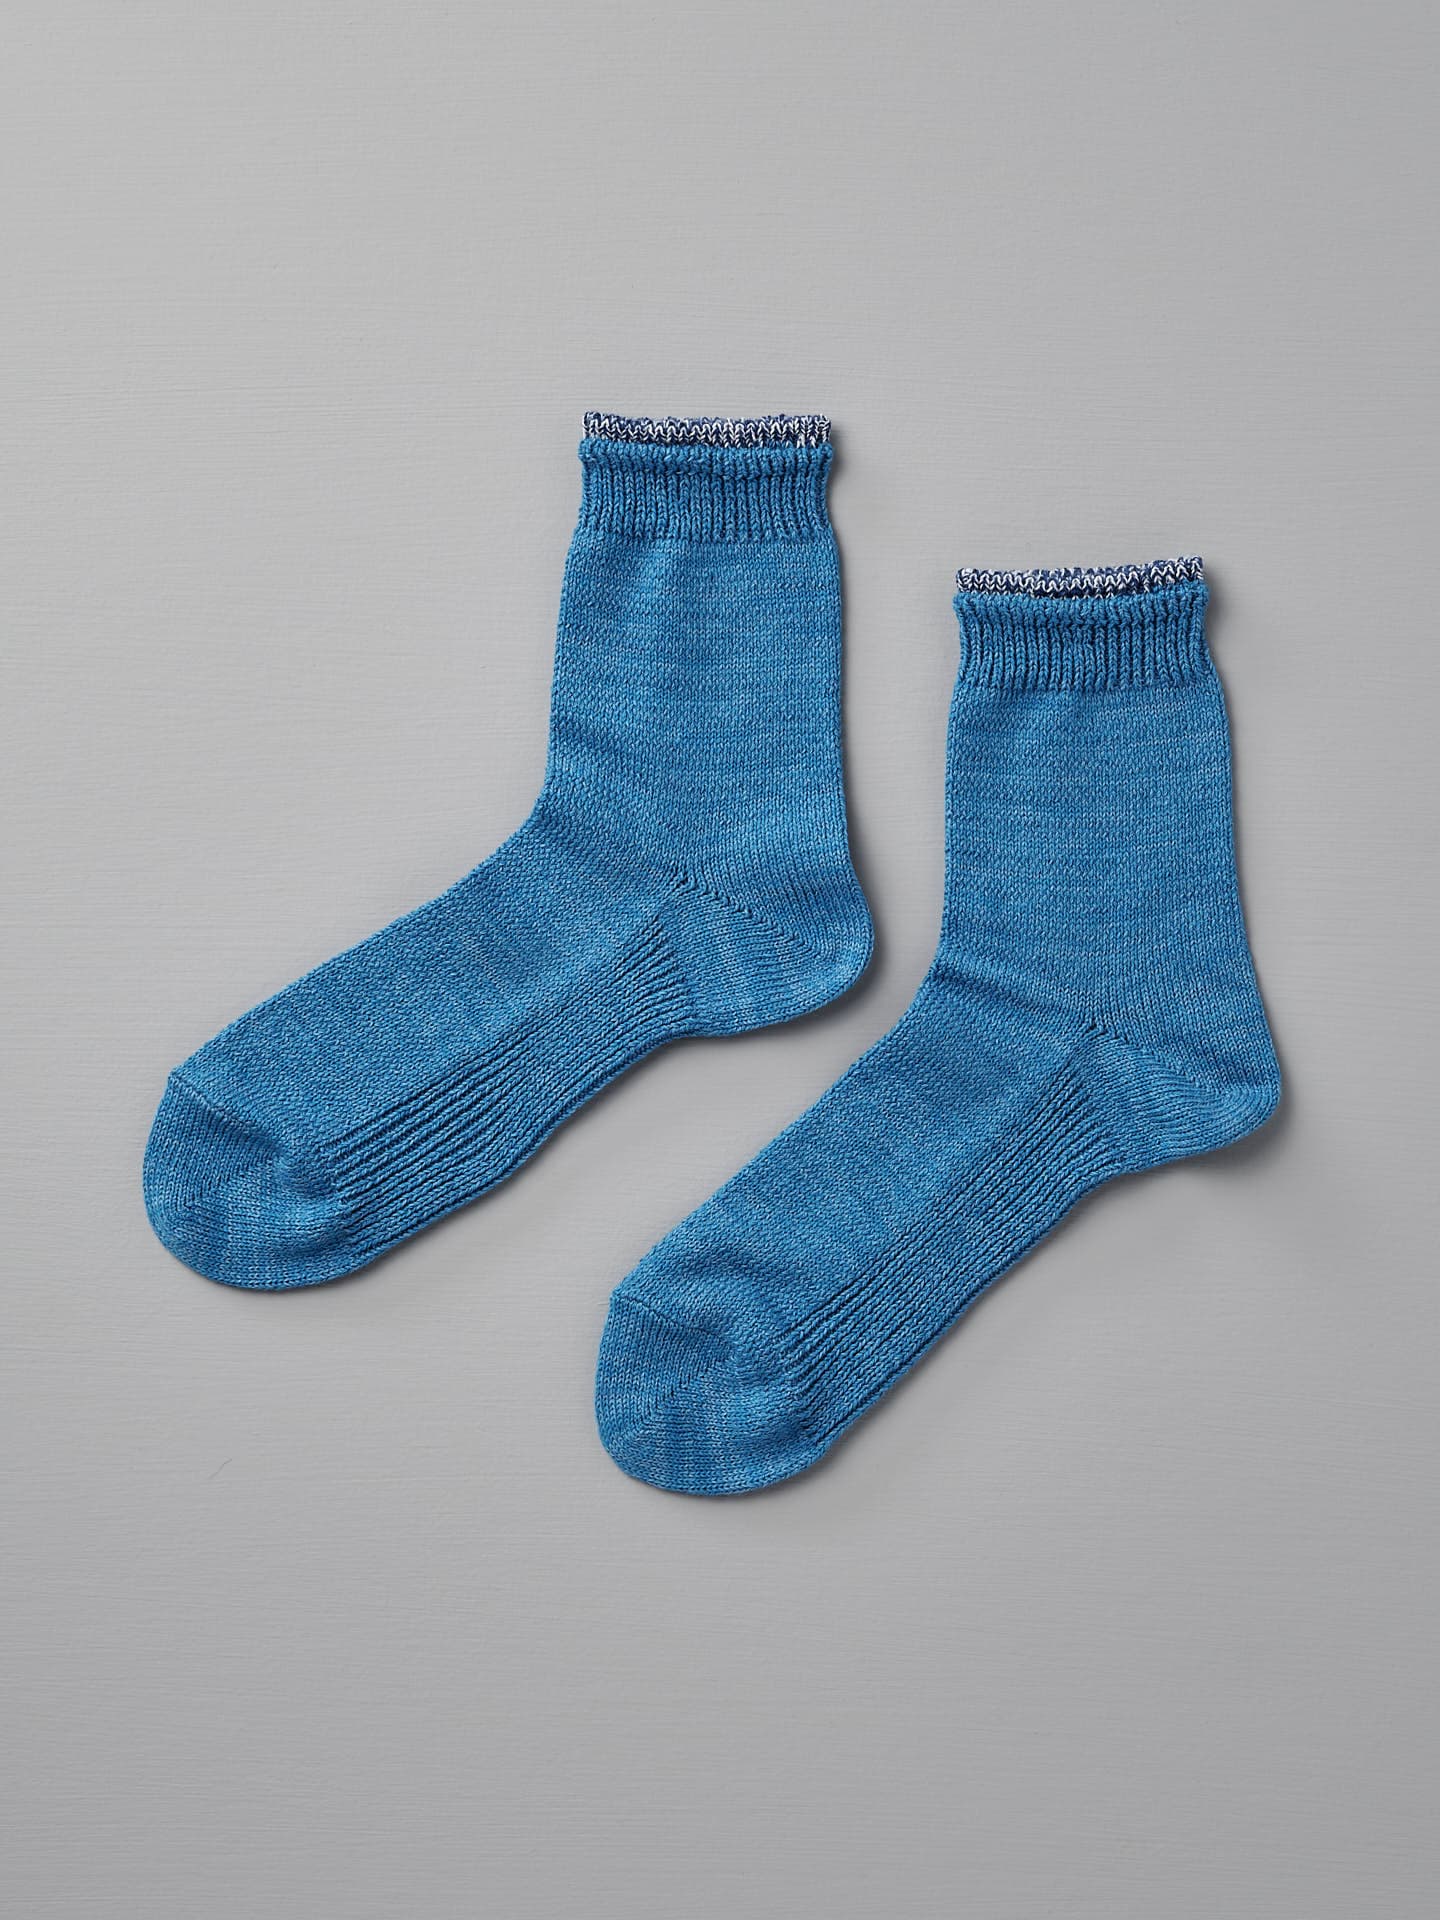 A pair of Mauna Kea Organic Top Switching Socks – Blue, sized EUR 35—38, are displayed on a white surface. They feature ribbed cuffs with a small, decorative white trim.